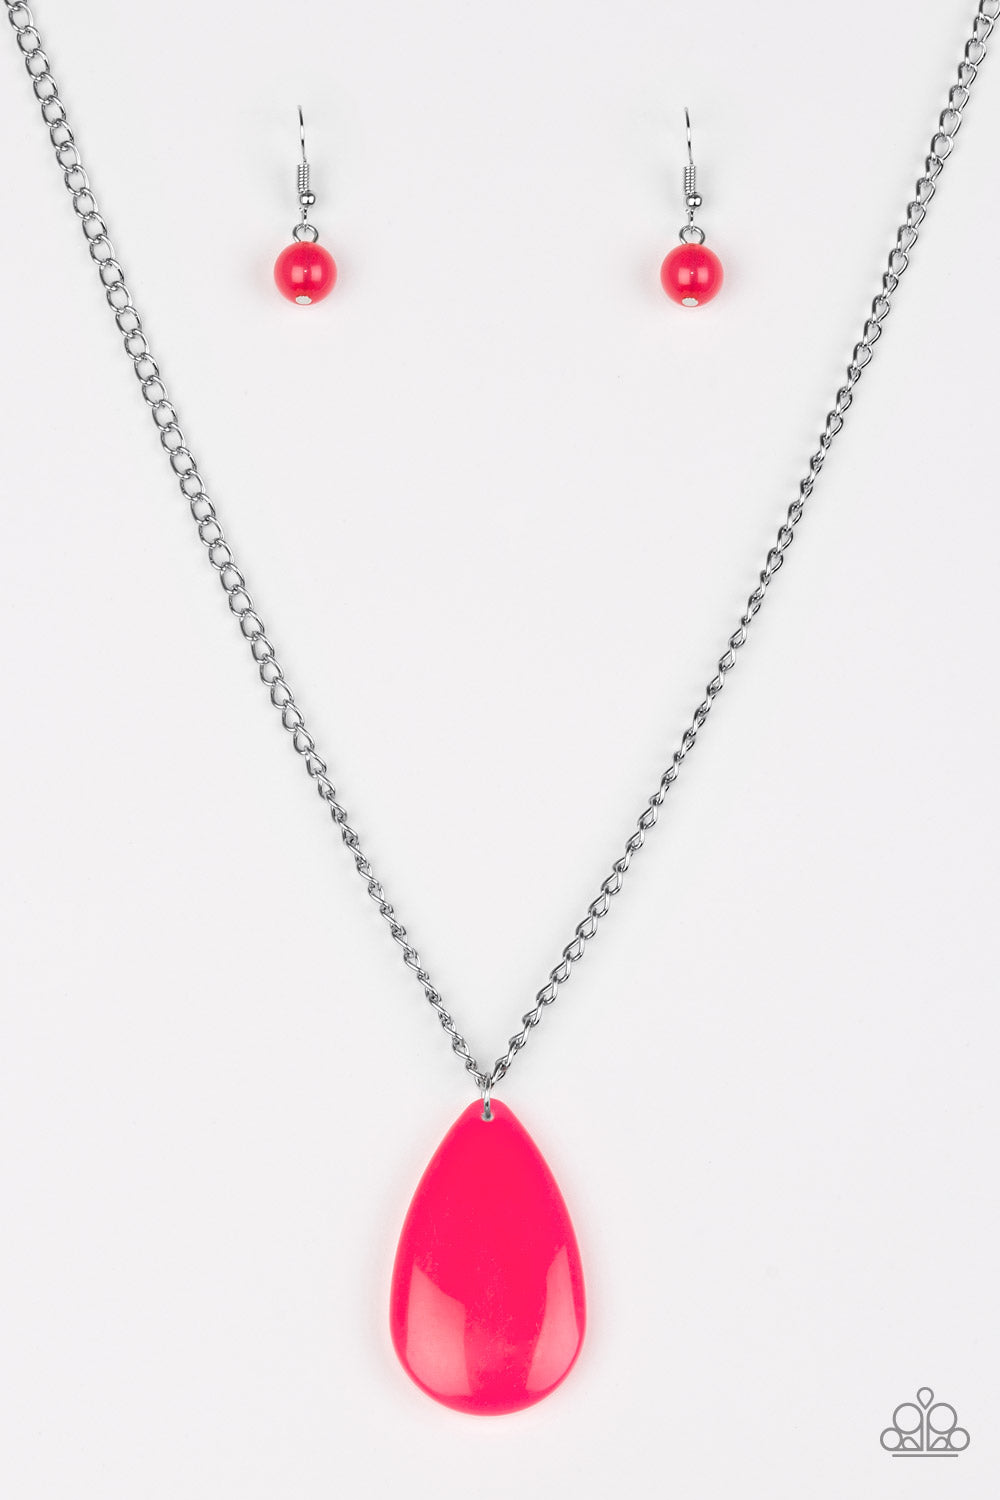 So Pop-YOU-lar - Pink - Necklace - Paparazzi Accessories